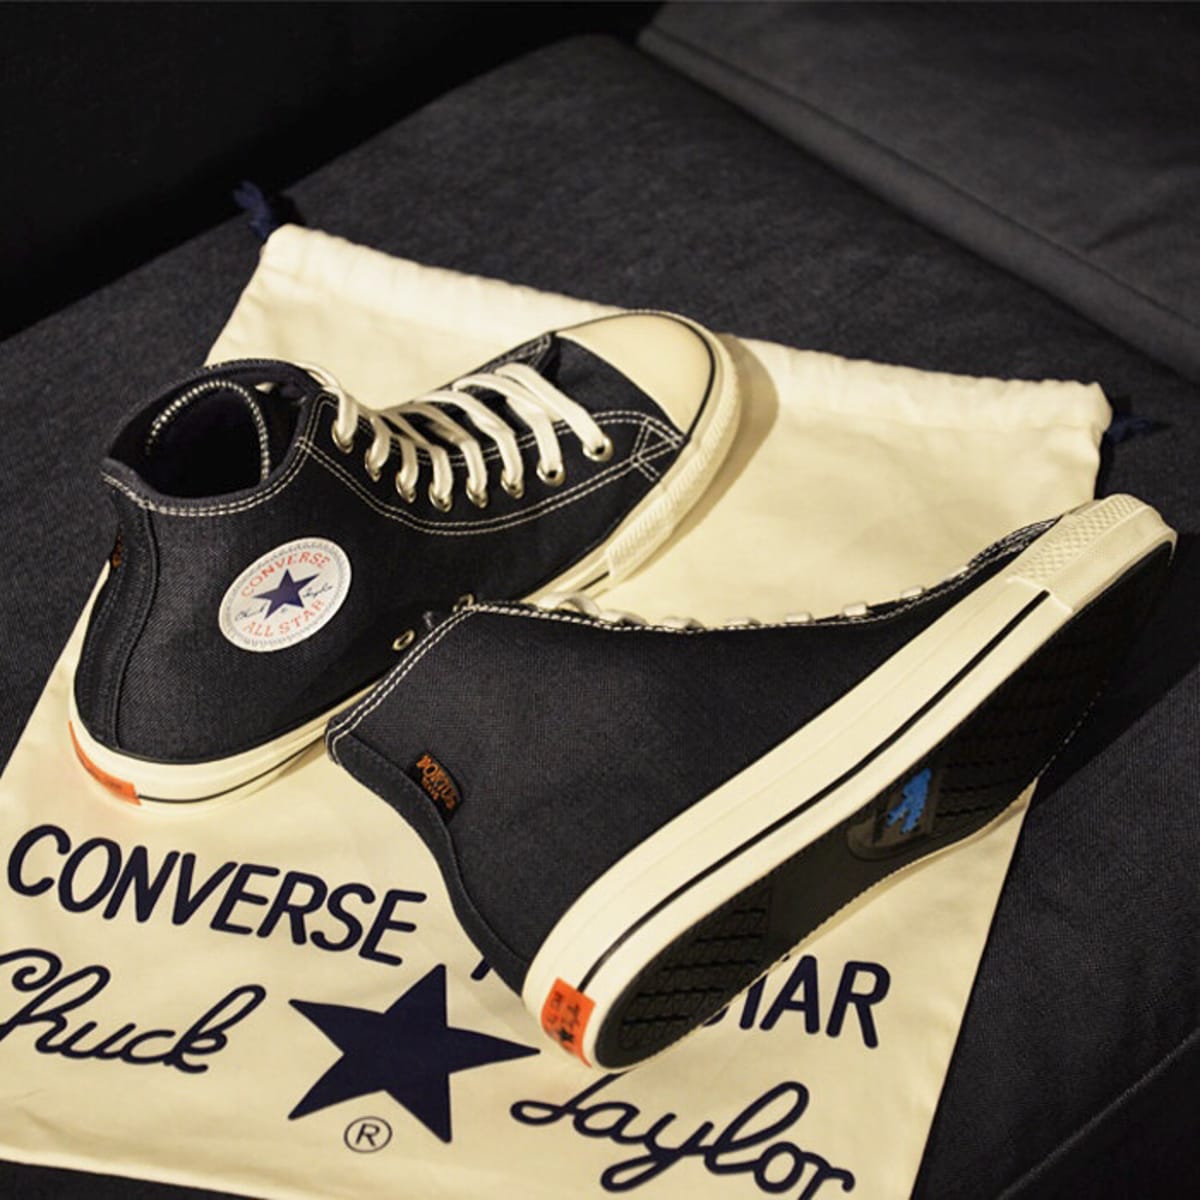 Porter celebrates the 100th Anniversary of the Chuck Taylor All